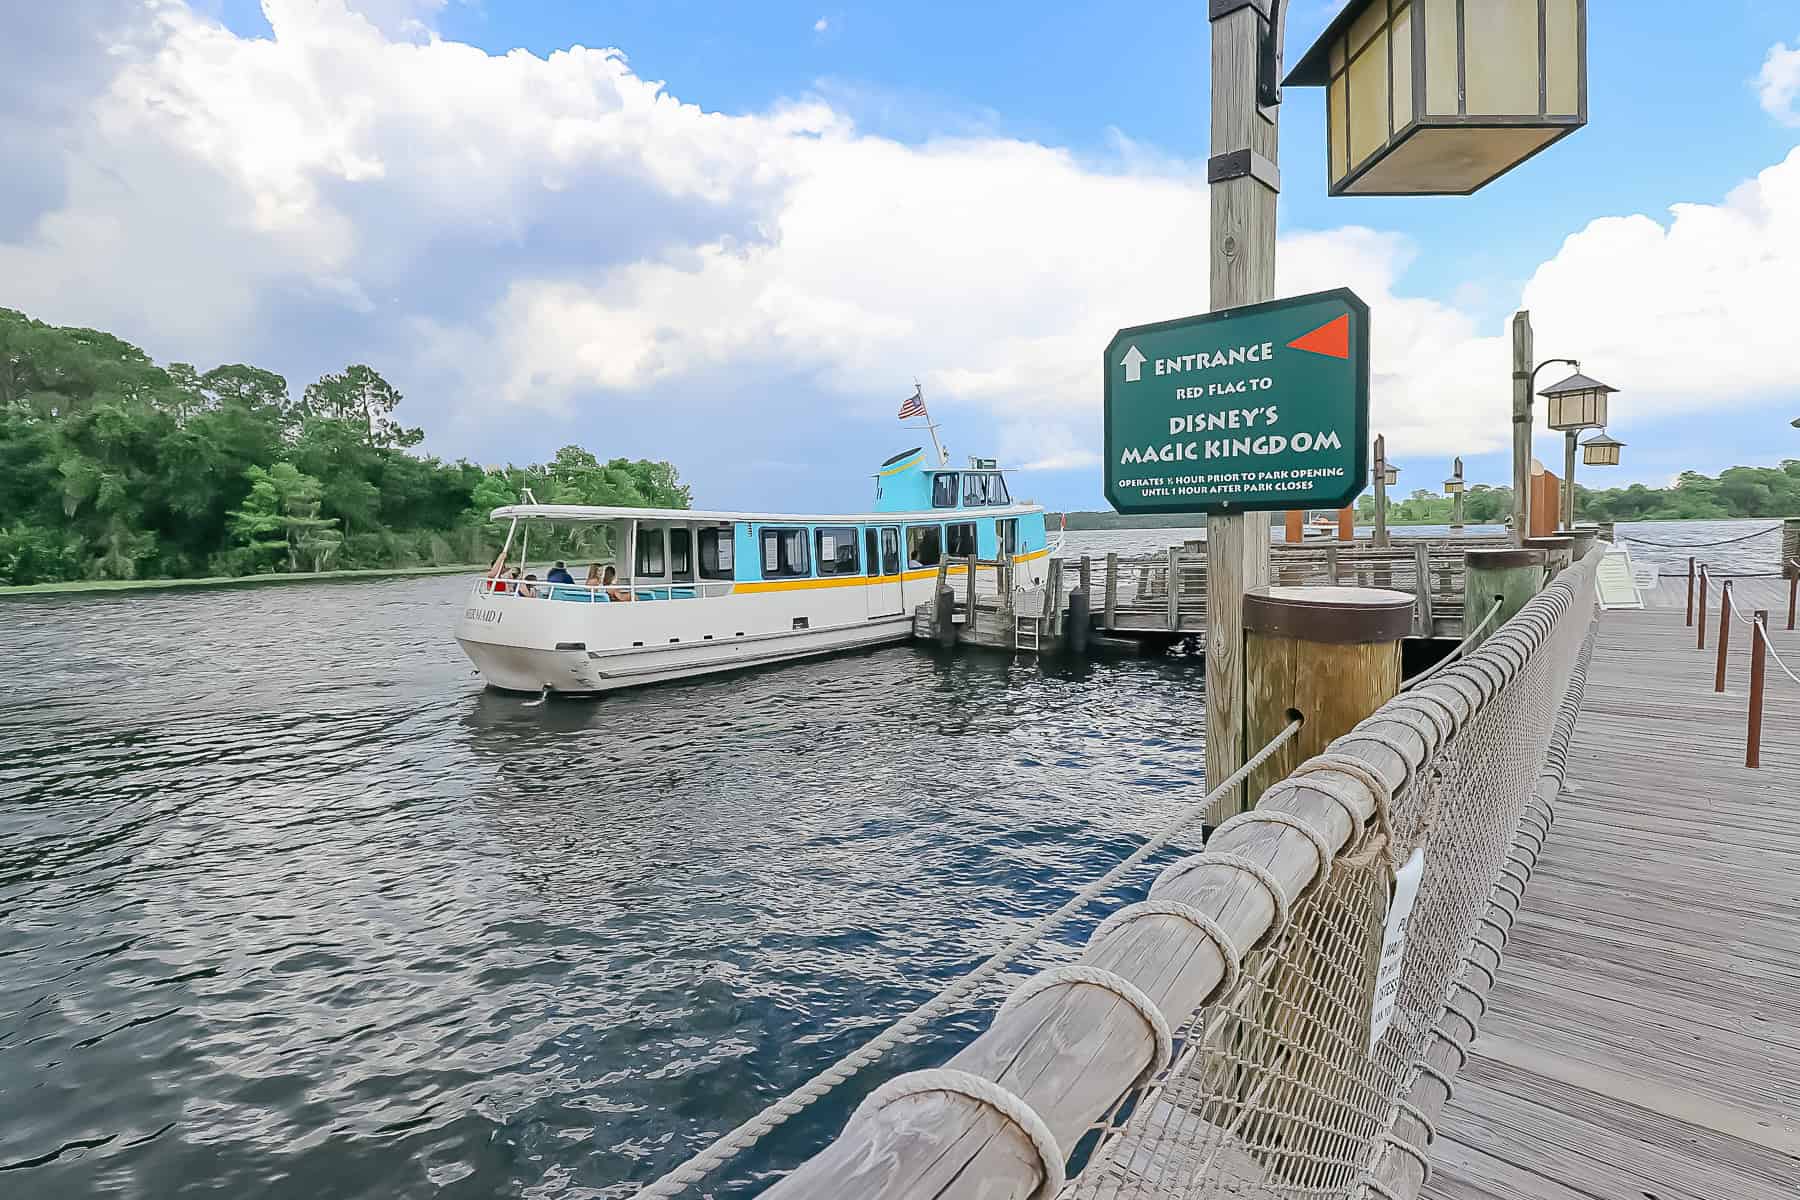 a sign that reads the entrance to the red flag to Disney's Magic Kingdom with the hours of operation for the Wilderness Lodge Boat 